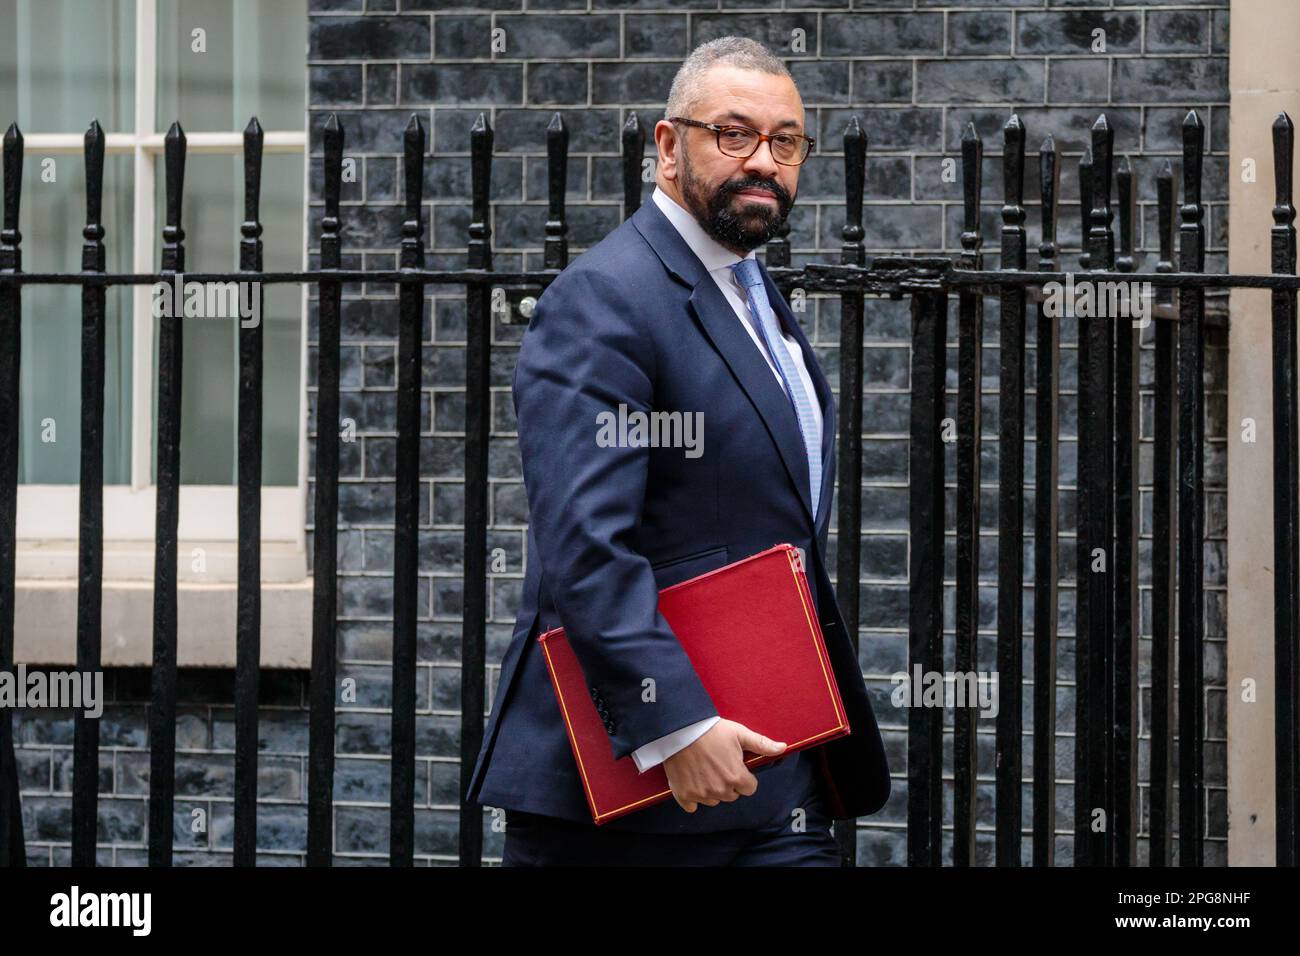 Downing Street, London, UK. 21st March 2023.  James Cleverly MP, Secretary of State for Foreign, Commonwealth and Development Affairs, attends the weekly Cabinet Meeting at 10 Downing Street. Photo by Amanda Rose/Alamy Live News Stock Photo